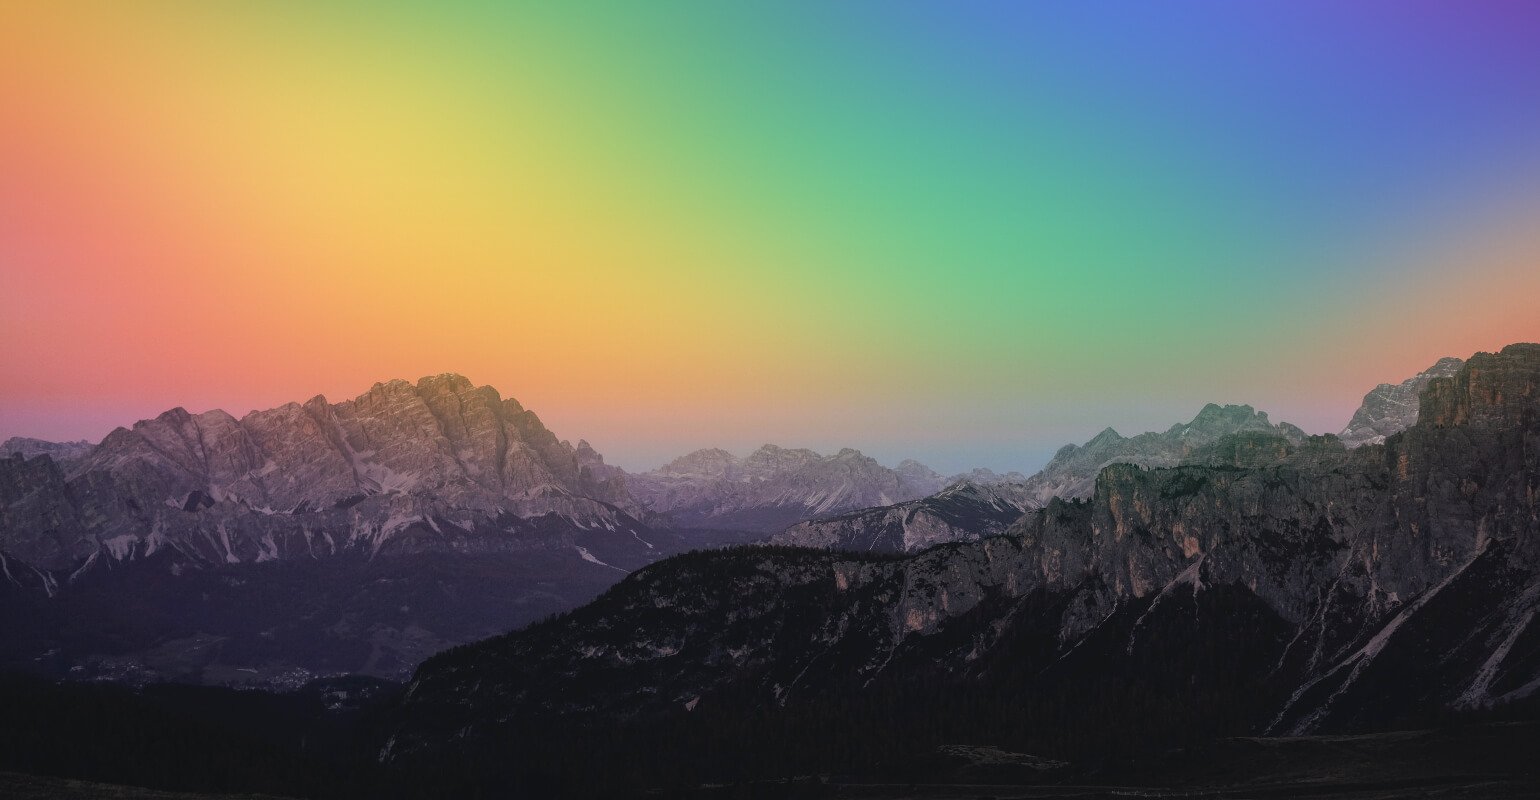 A sunset landscape photo with rainbow filter